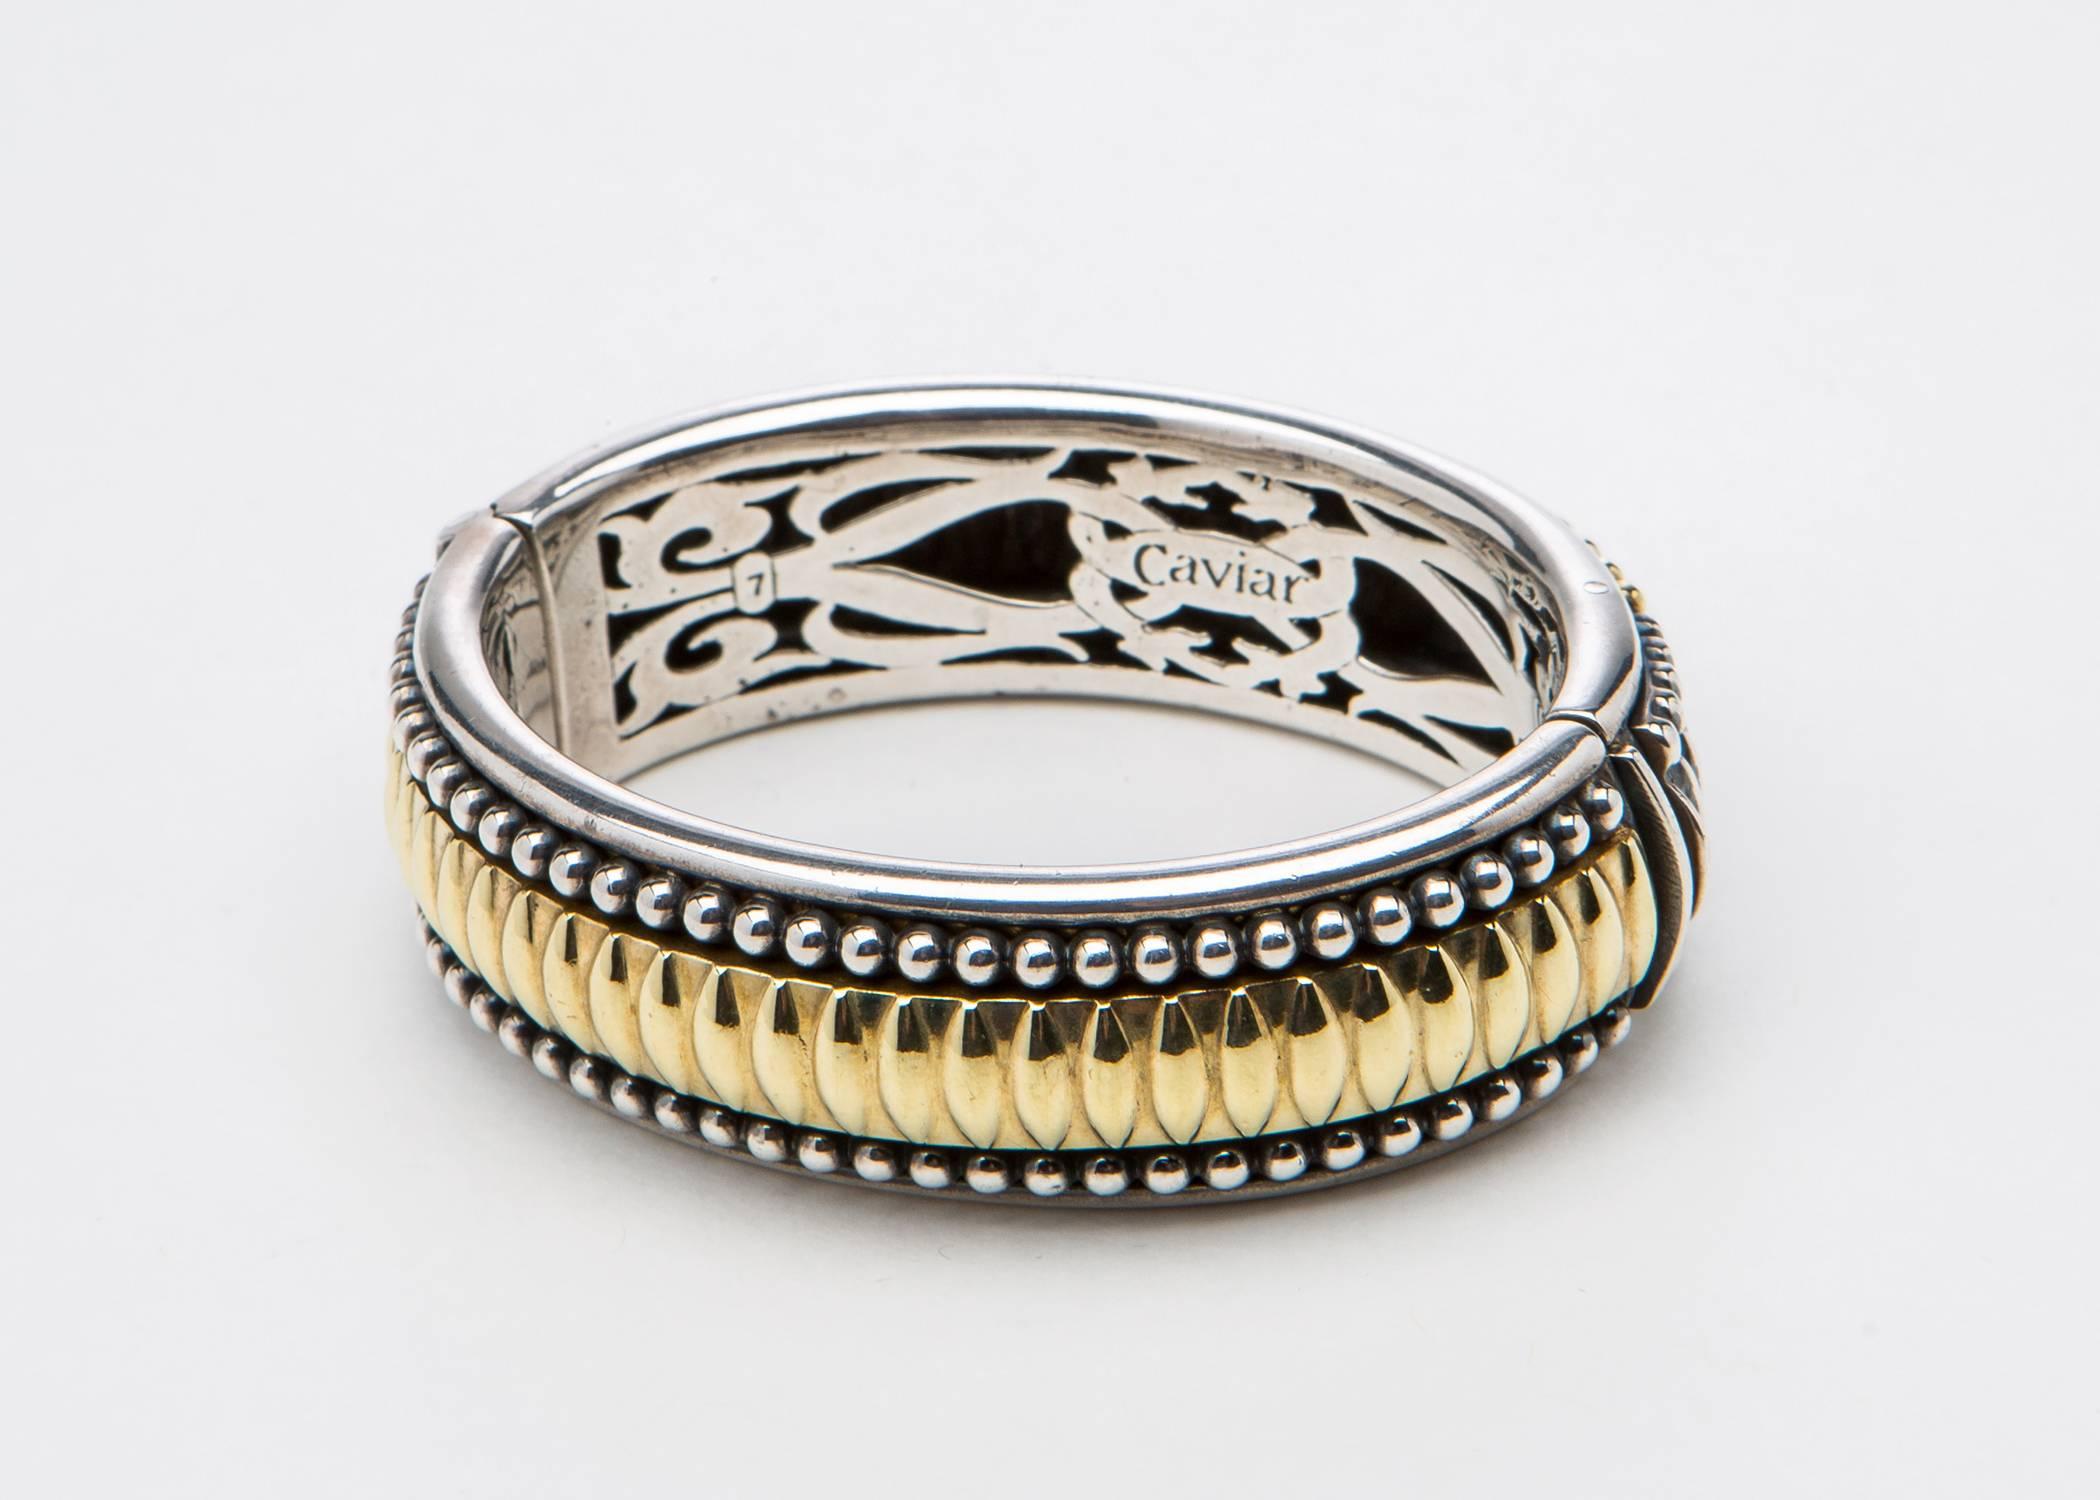 Your new everyday bracelet !!! Steven Lagos combines rich 18k gold with gleaming silver to create a bold classic statement piece. His Caviar Collection detailing is simple and elegant. 3/4 inch in width